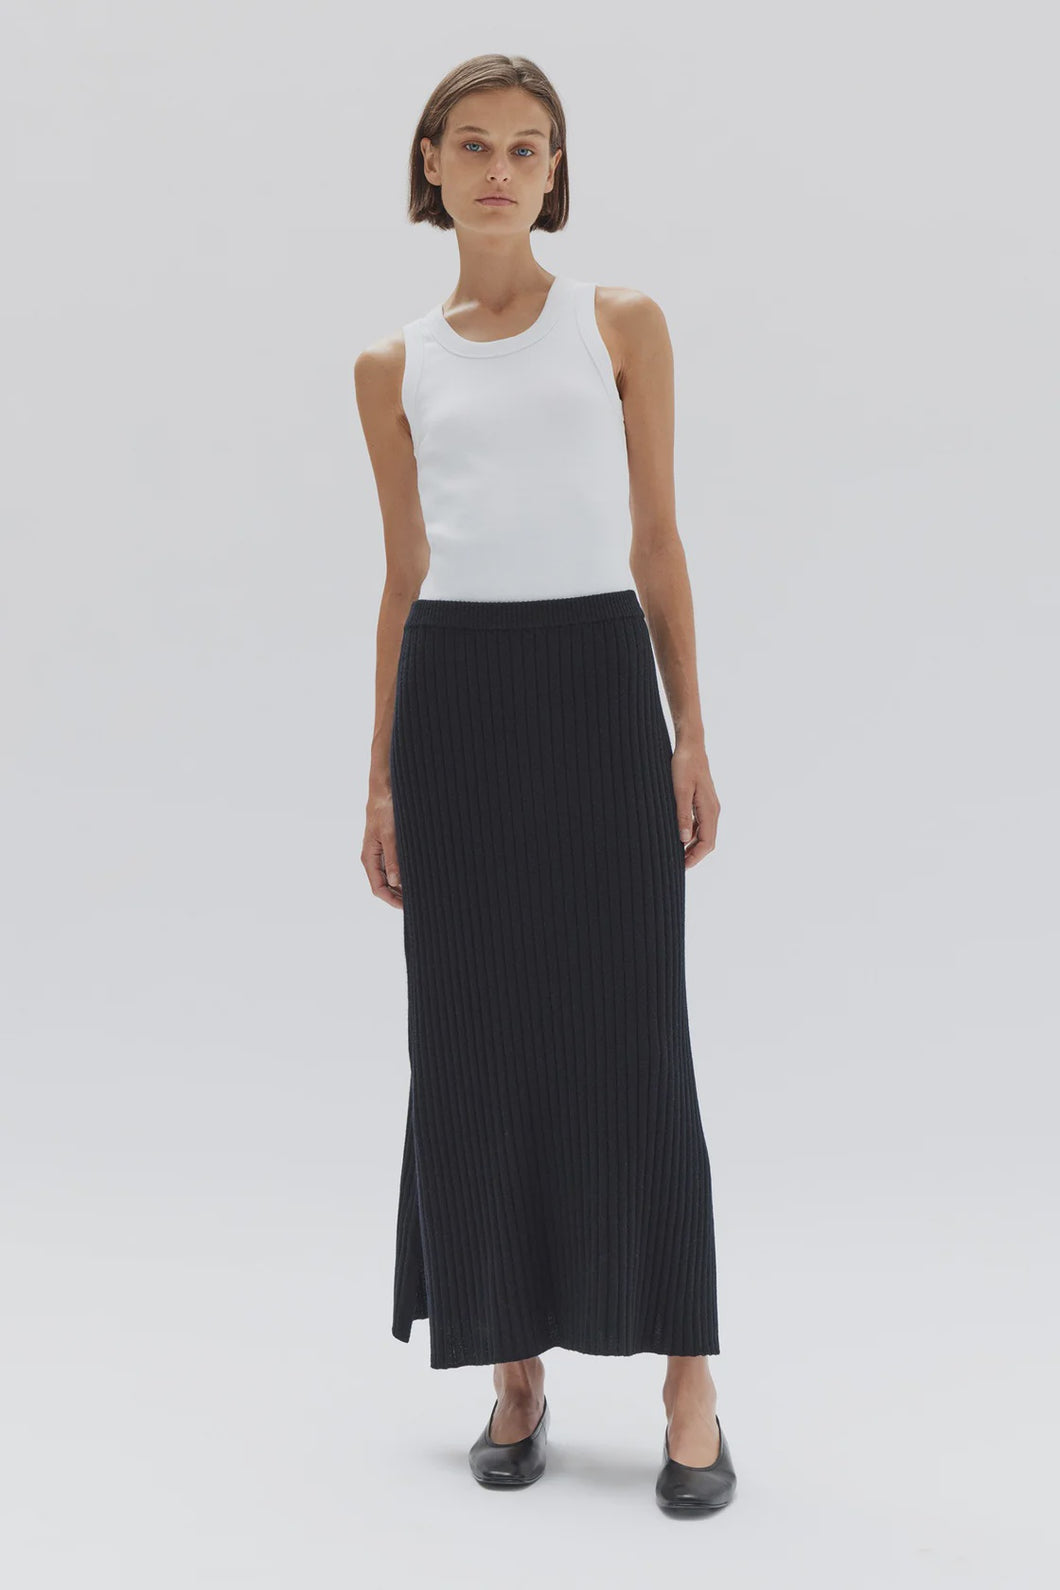 ASSEMBLY - WOOL CASHMERE RIB SKIRT in BLACK